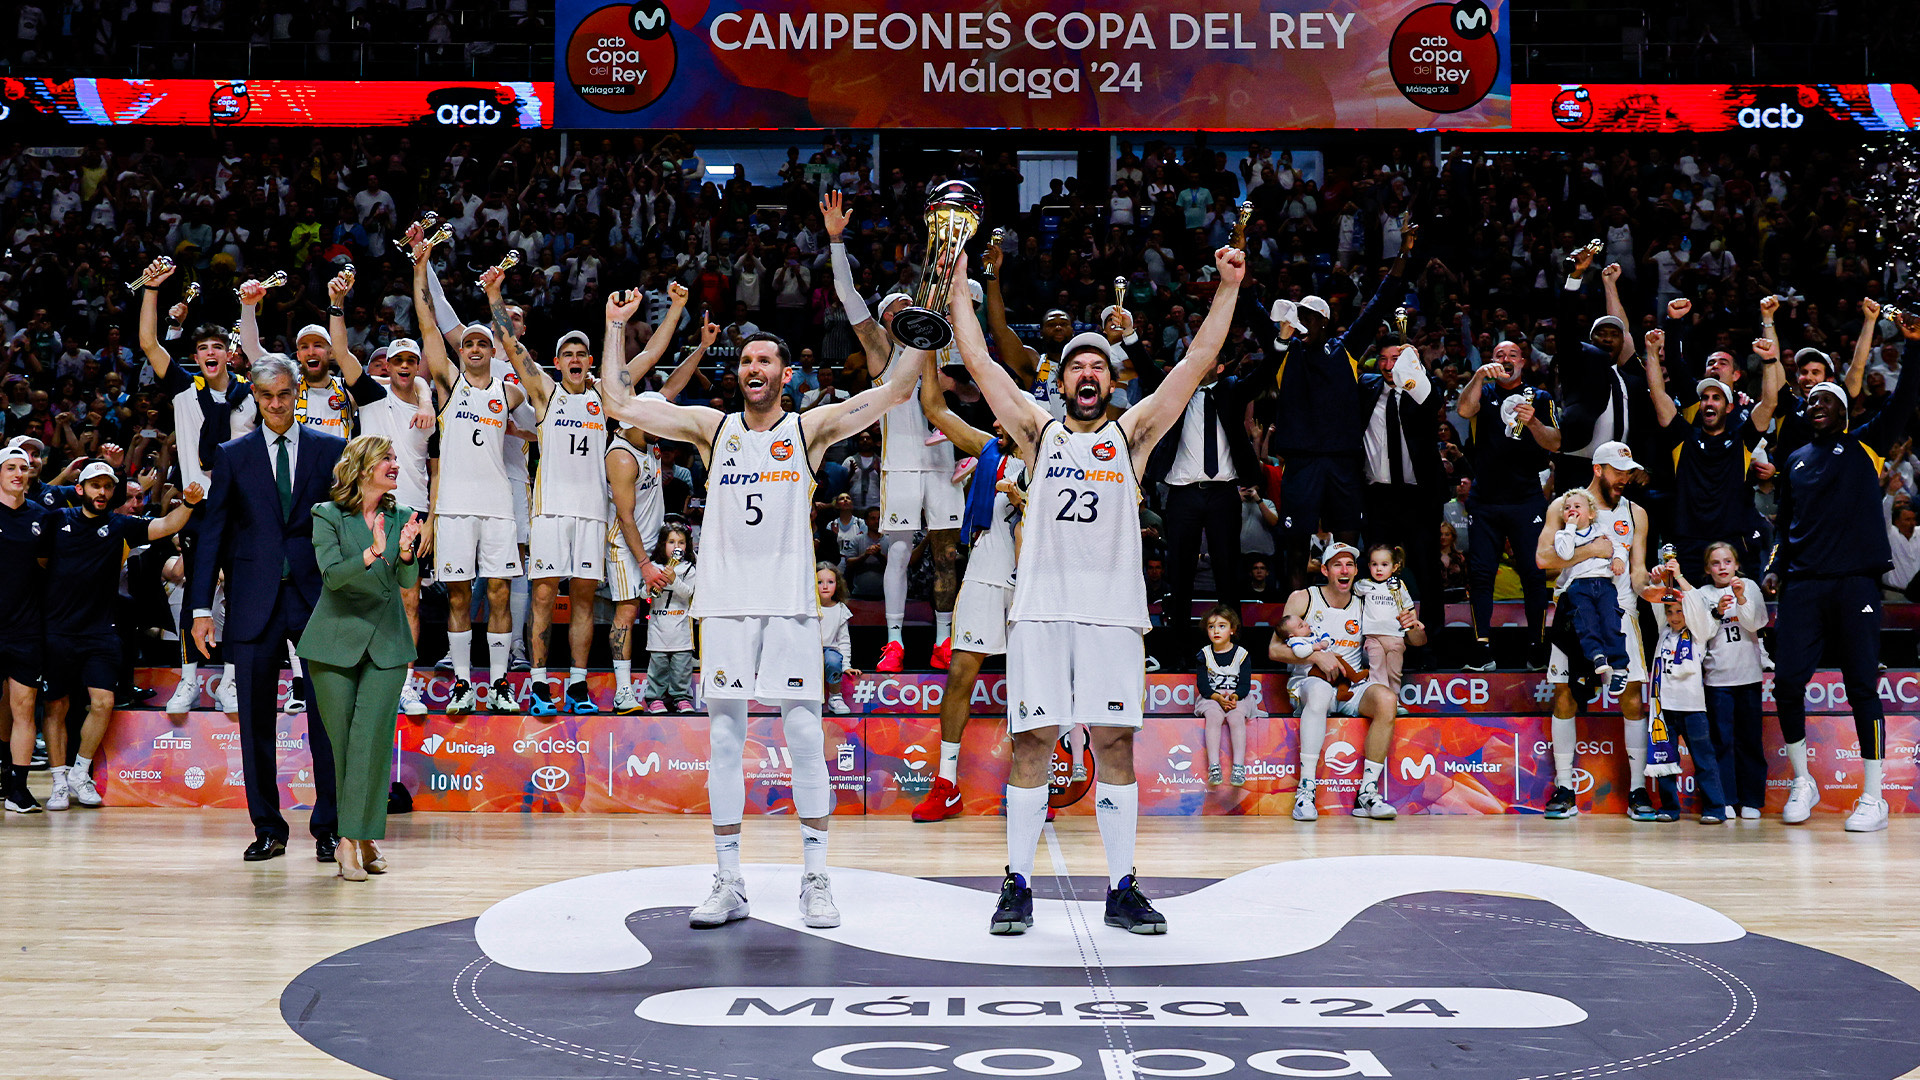 Real Madrid wins the Copa del Rey against FC Barcelona